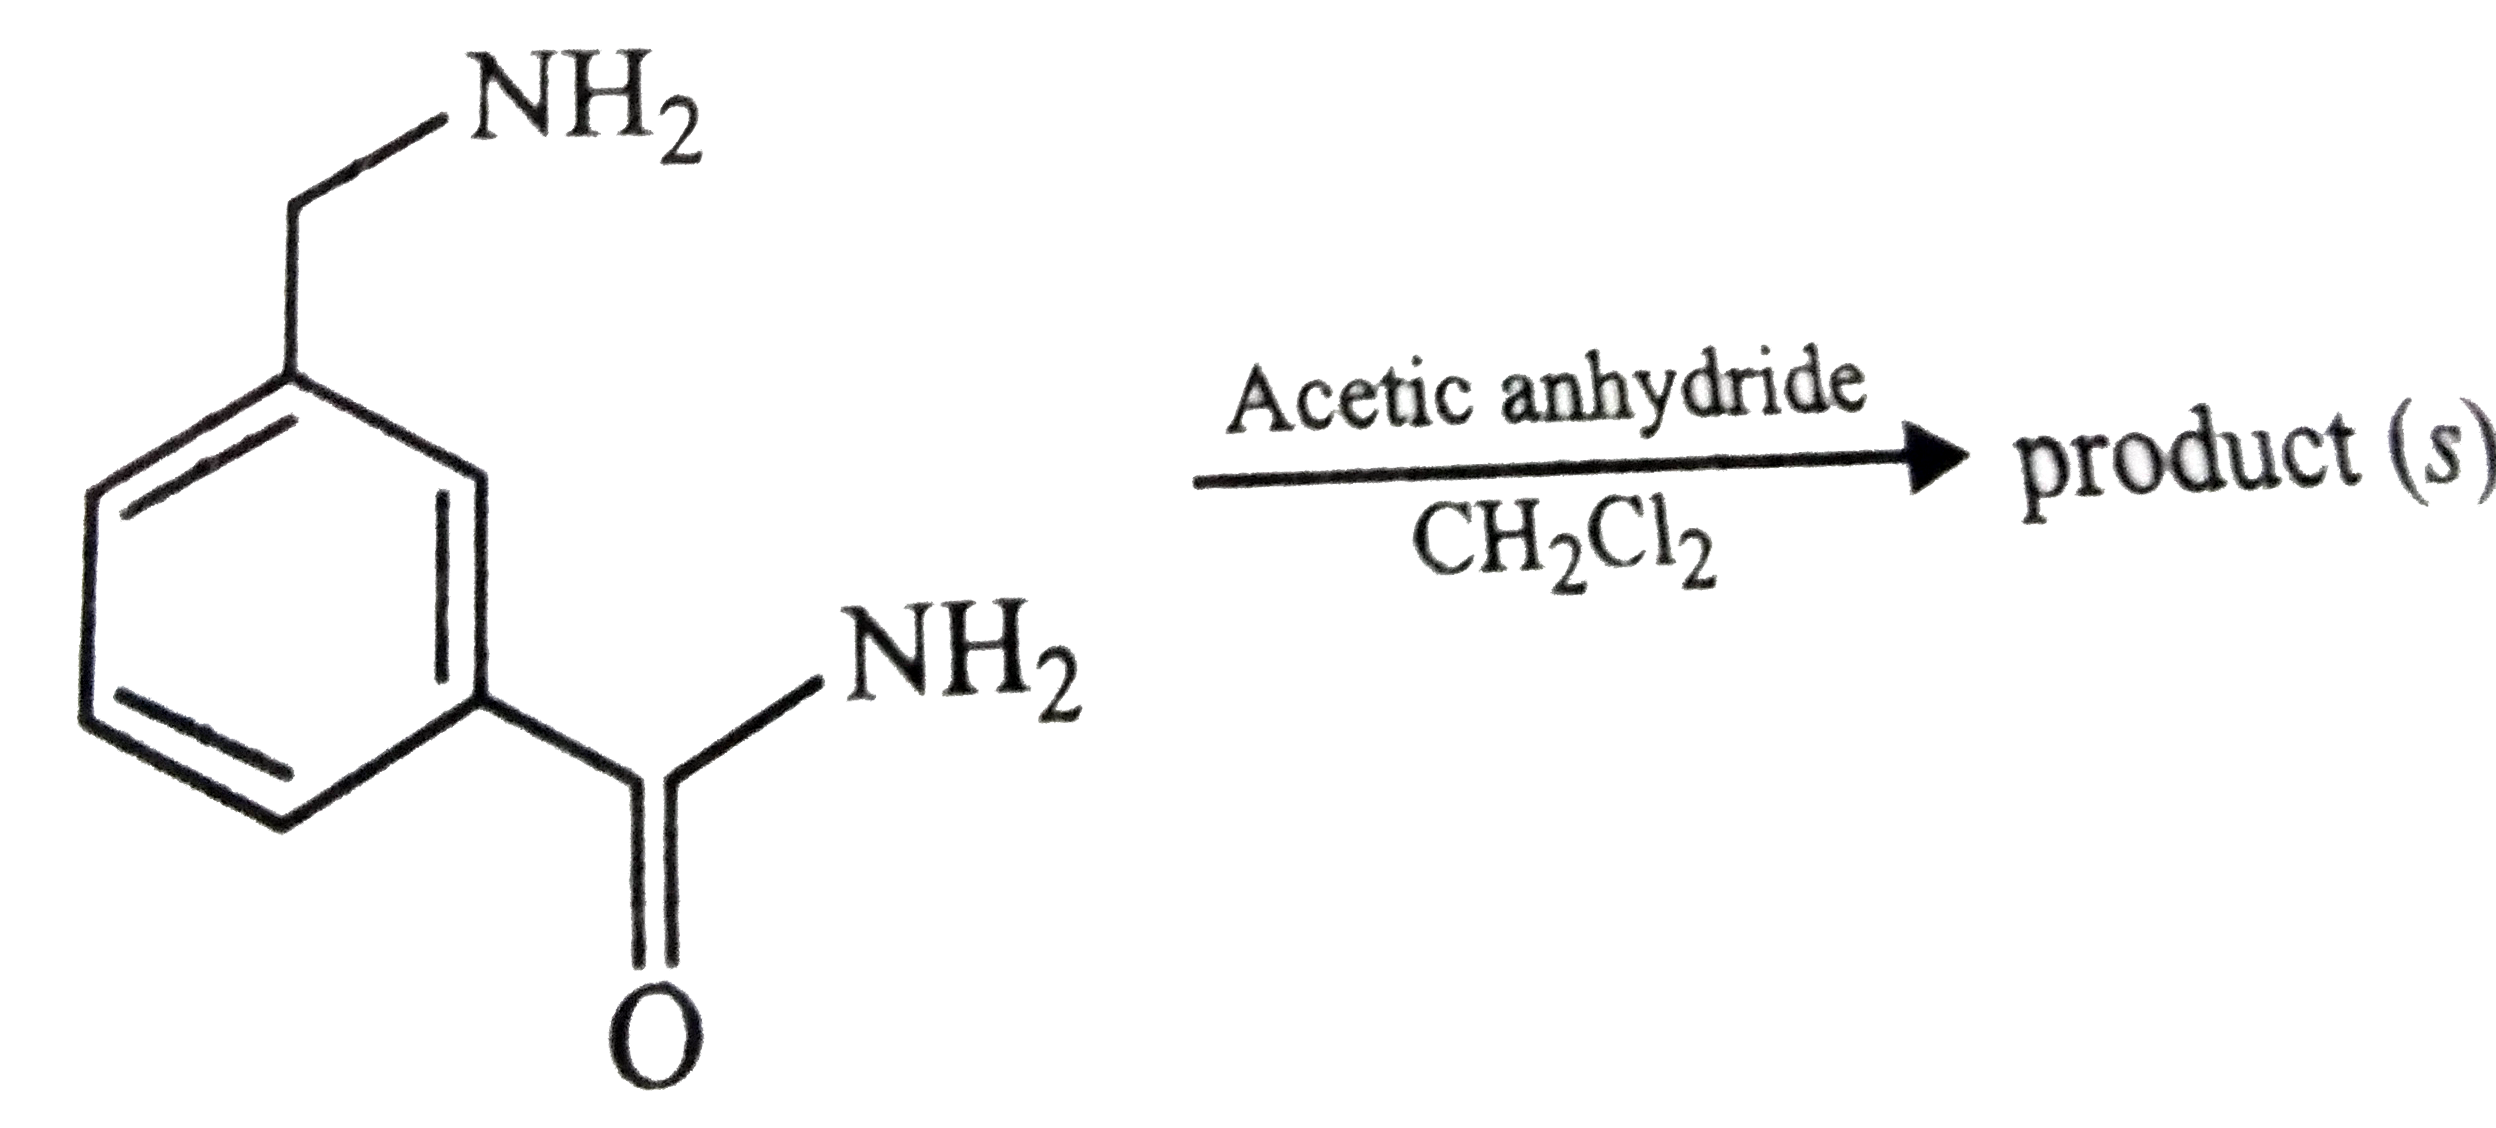 In the reaction shown below, the major product formed is/are